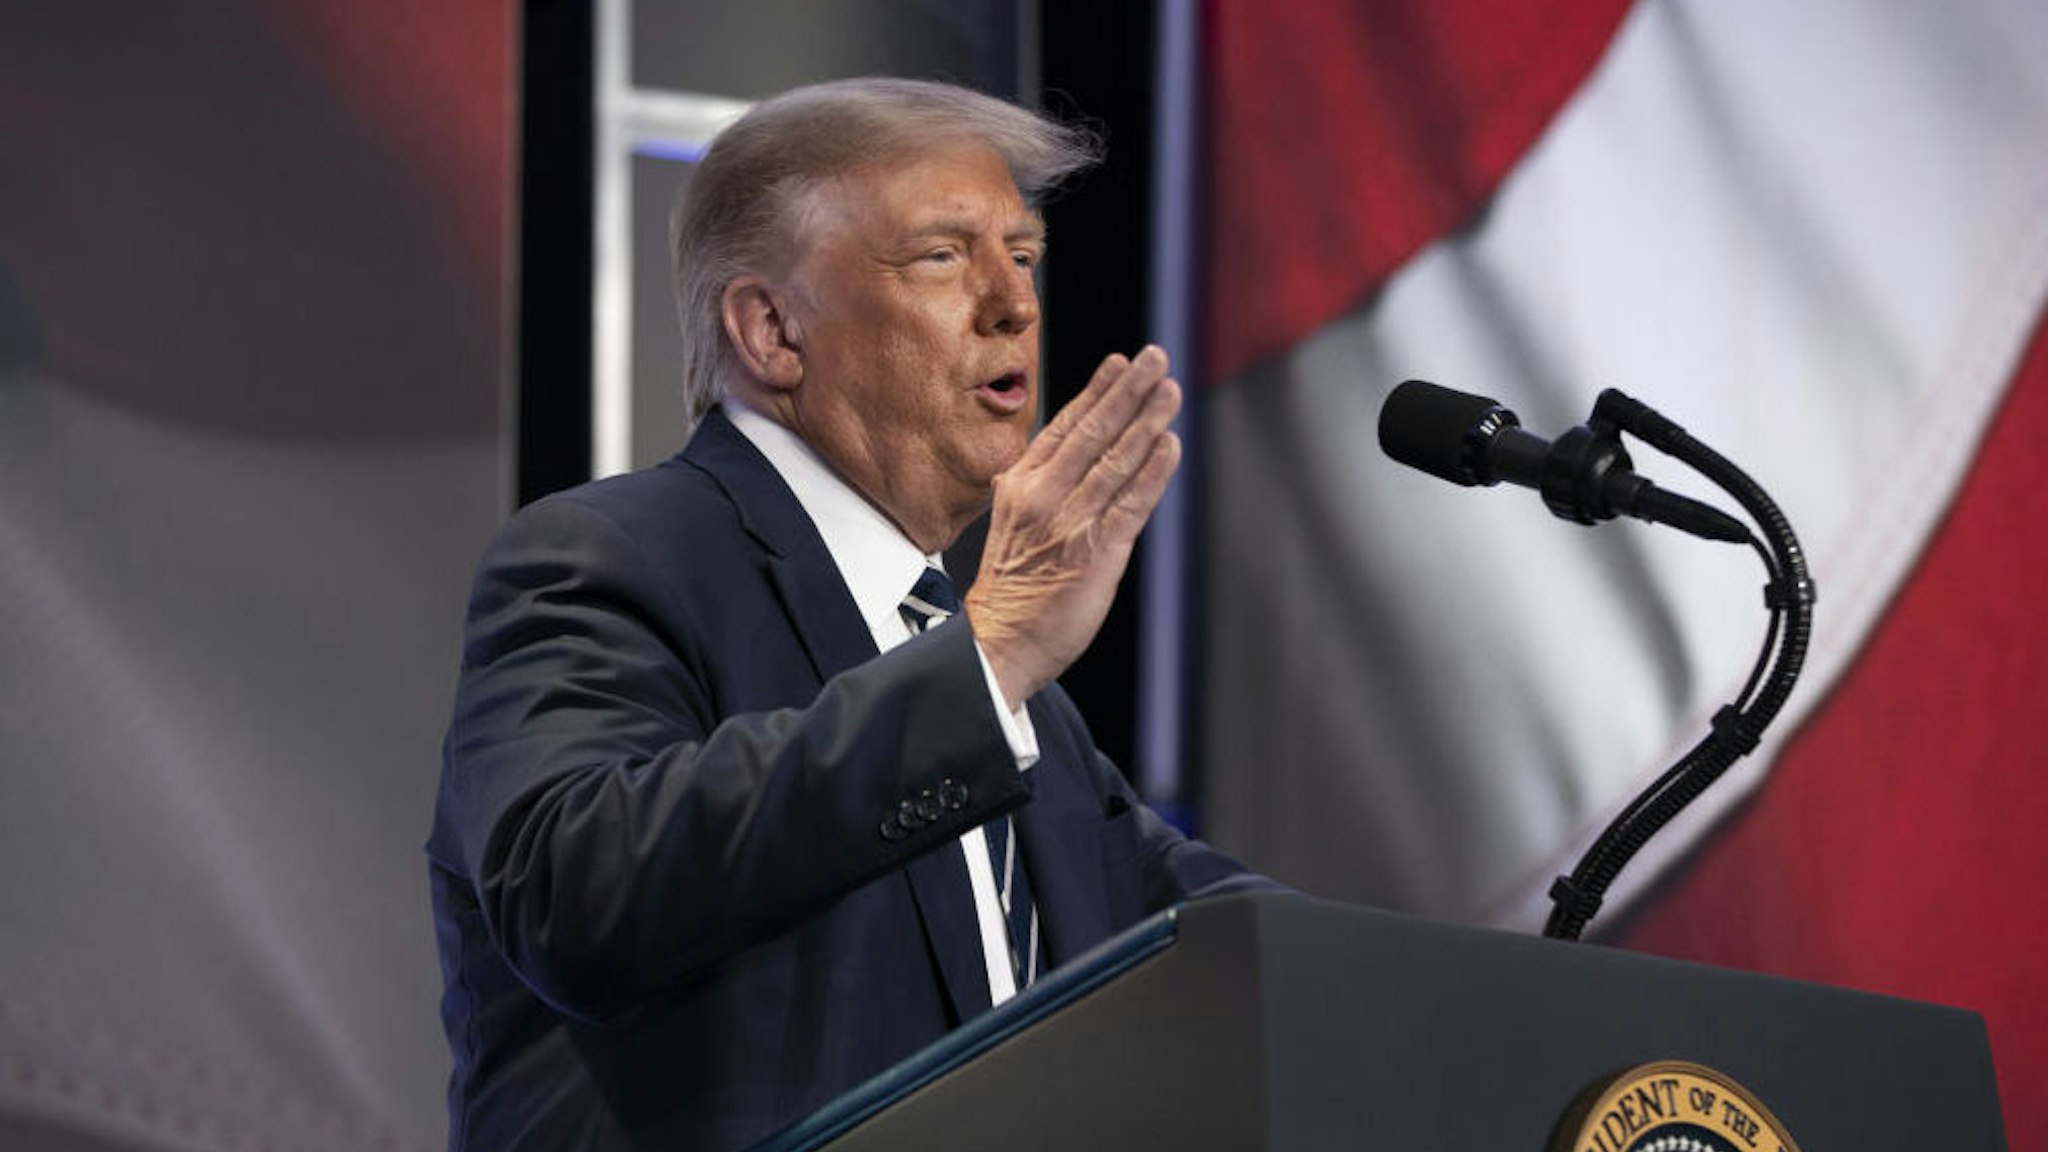 U.S. President Donald Trump speaks at the 2020 Council for National Policy Meeting in Arlington, Virginia, U.S., on Friday, Aug. 21, 2020. Trump said that he isn't trying to steal the election and that the results may not be known for weeks.